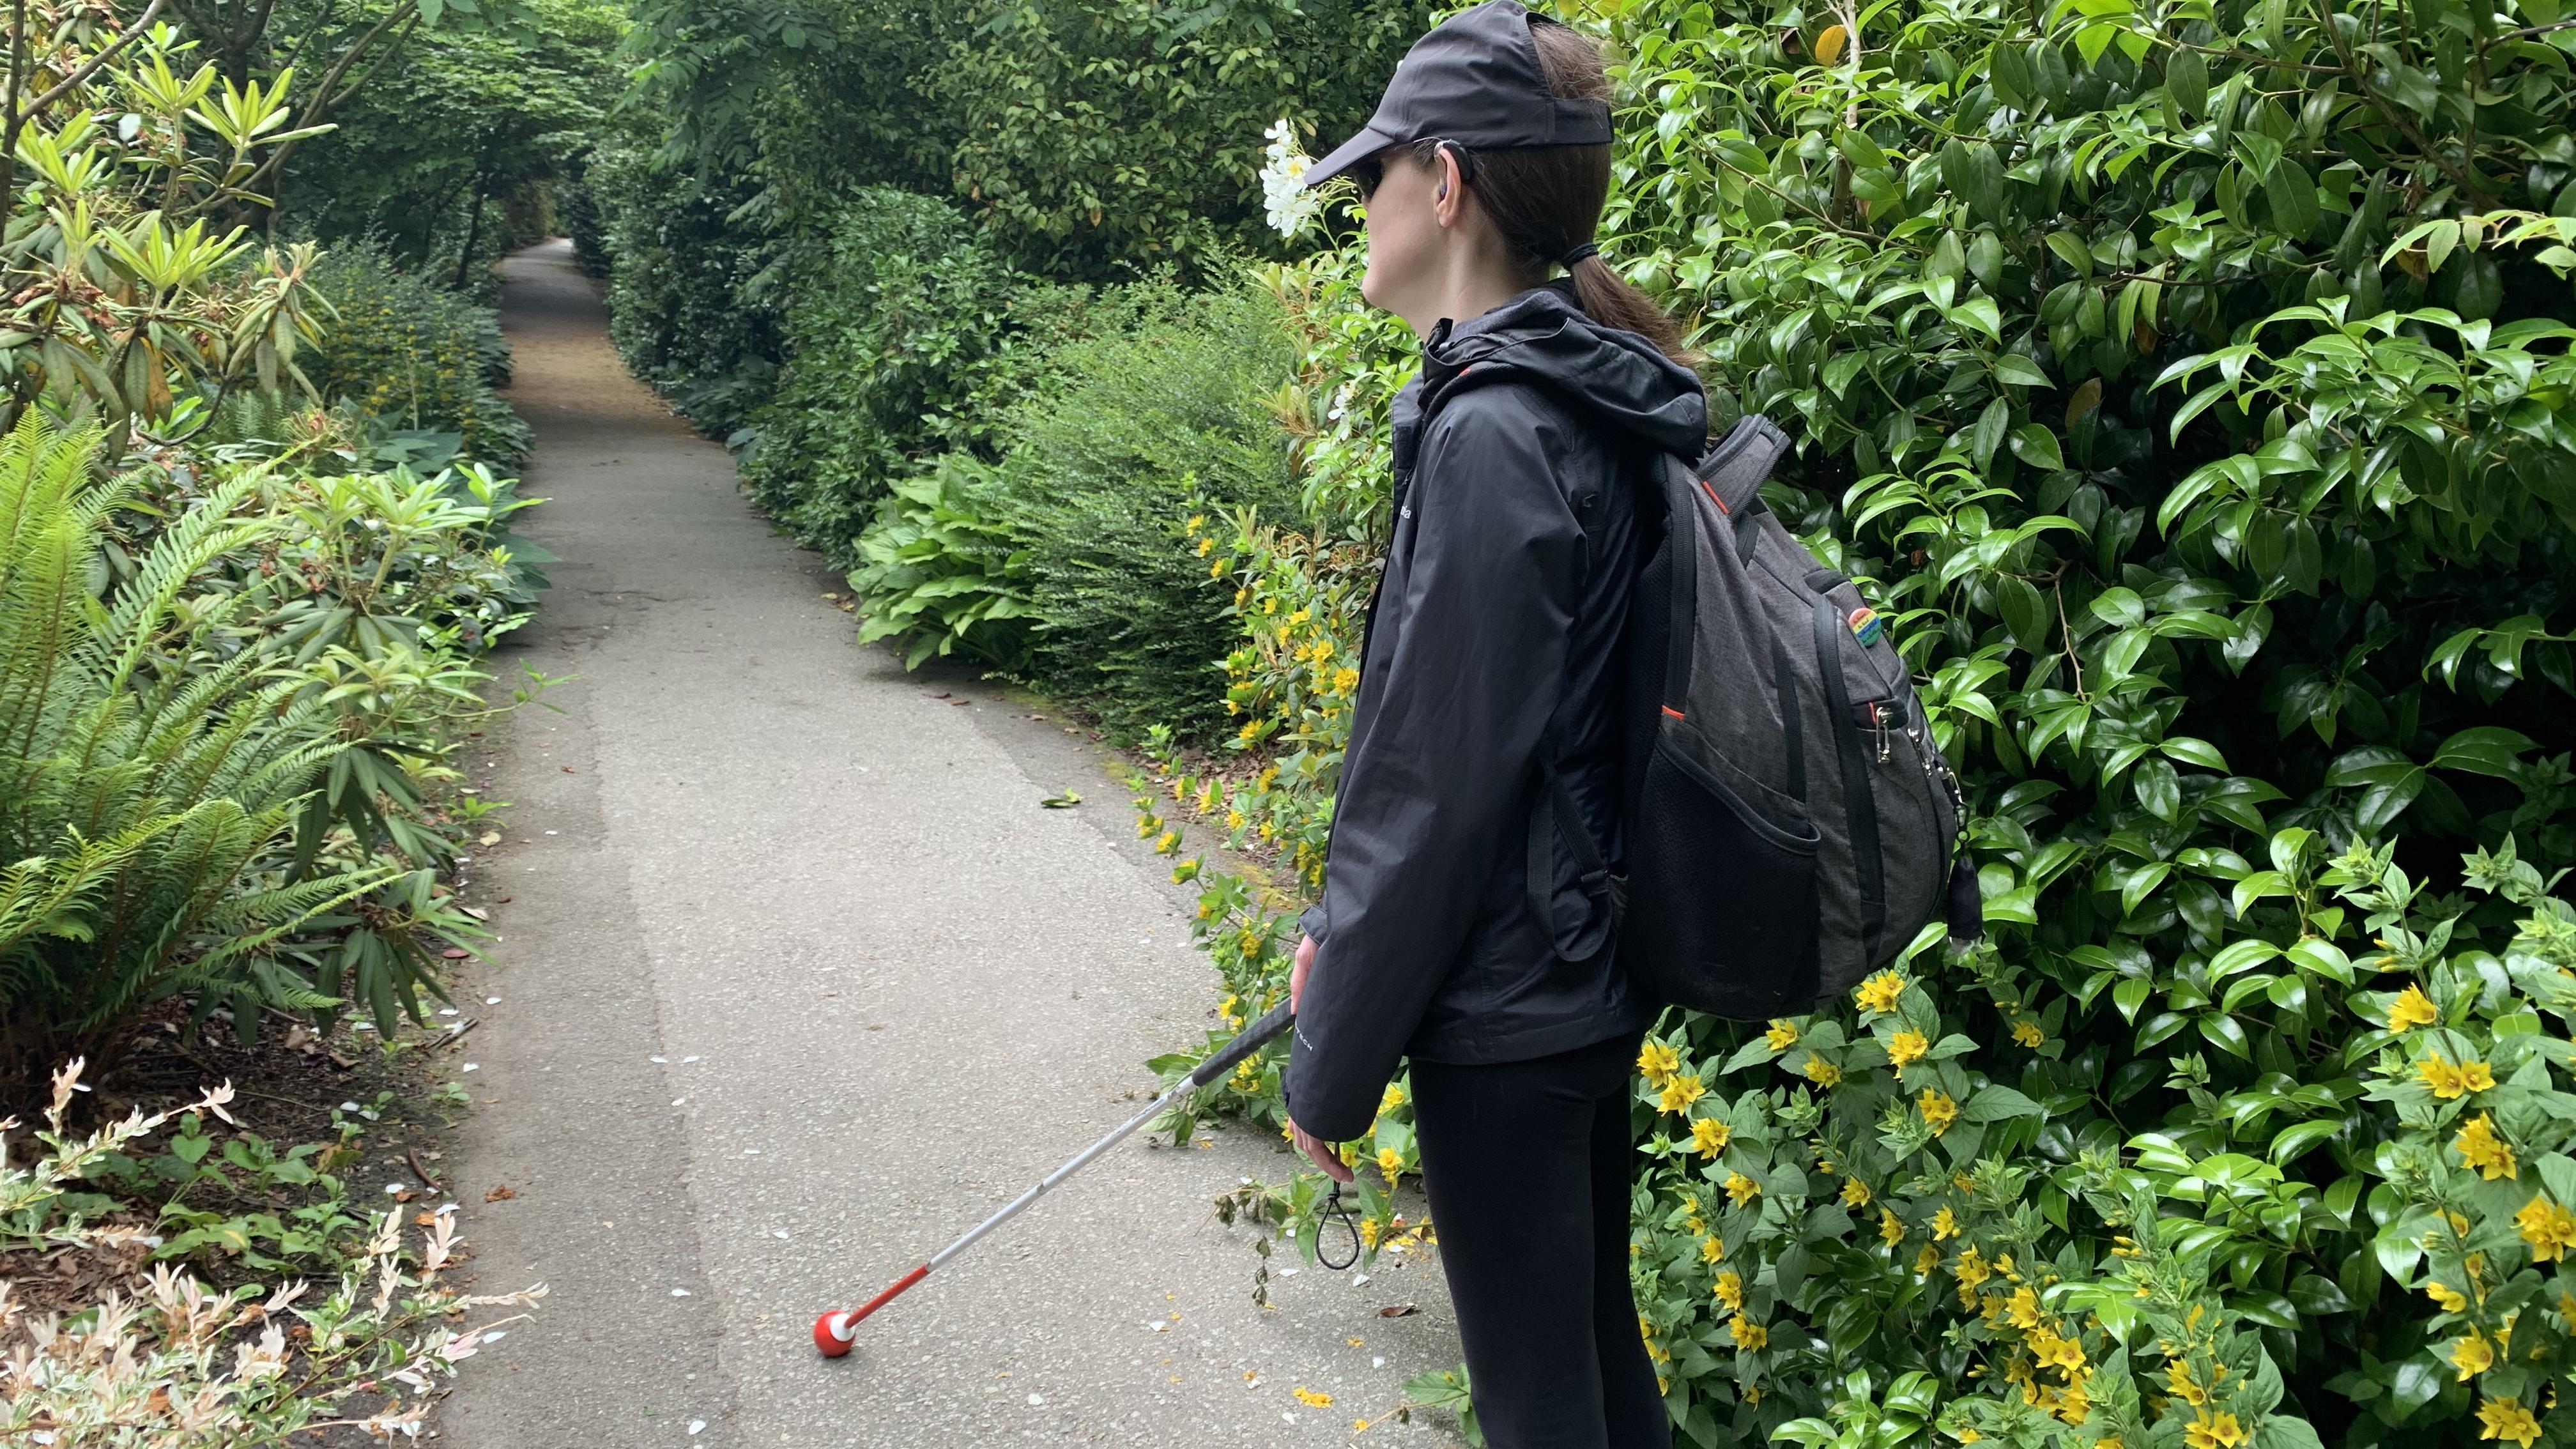 Abby walks along a lush green nature pathway and navigates with their white cane. Abby is turned away from the camera